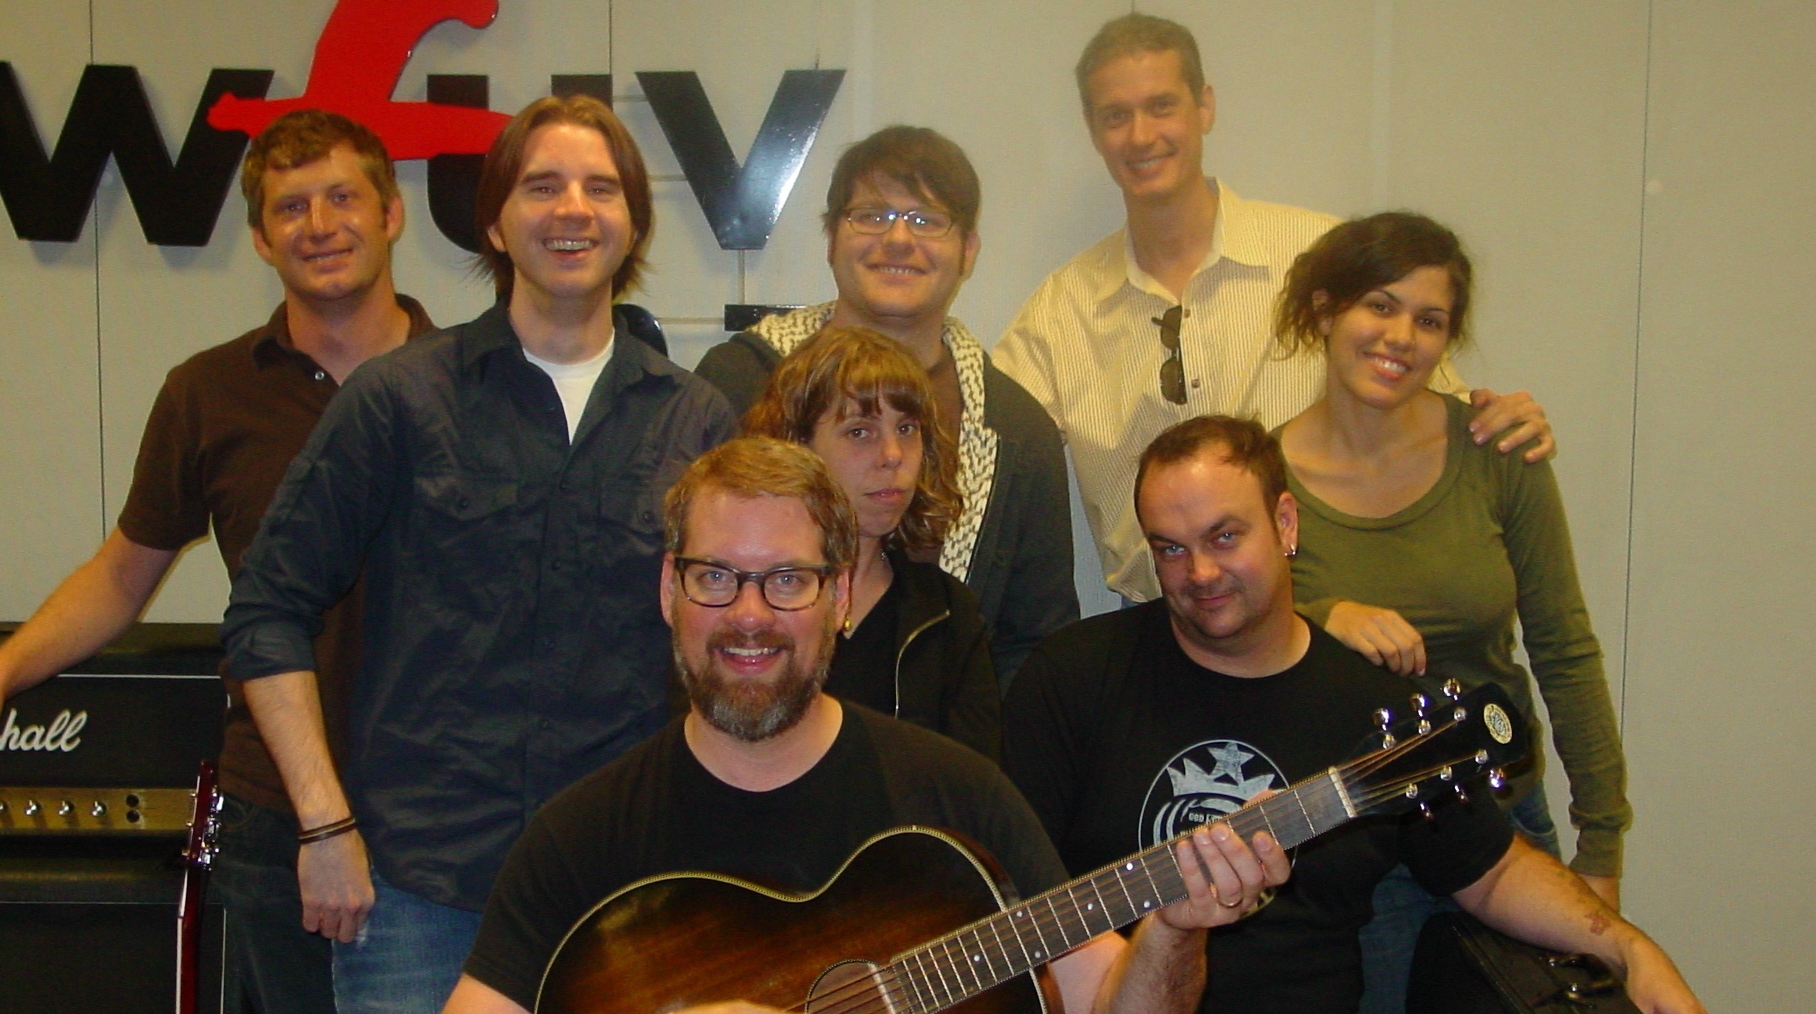 The Decemberists with Russ Borris and Ed Pinka at FUV